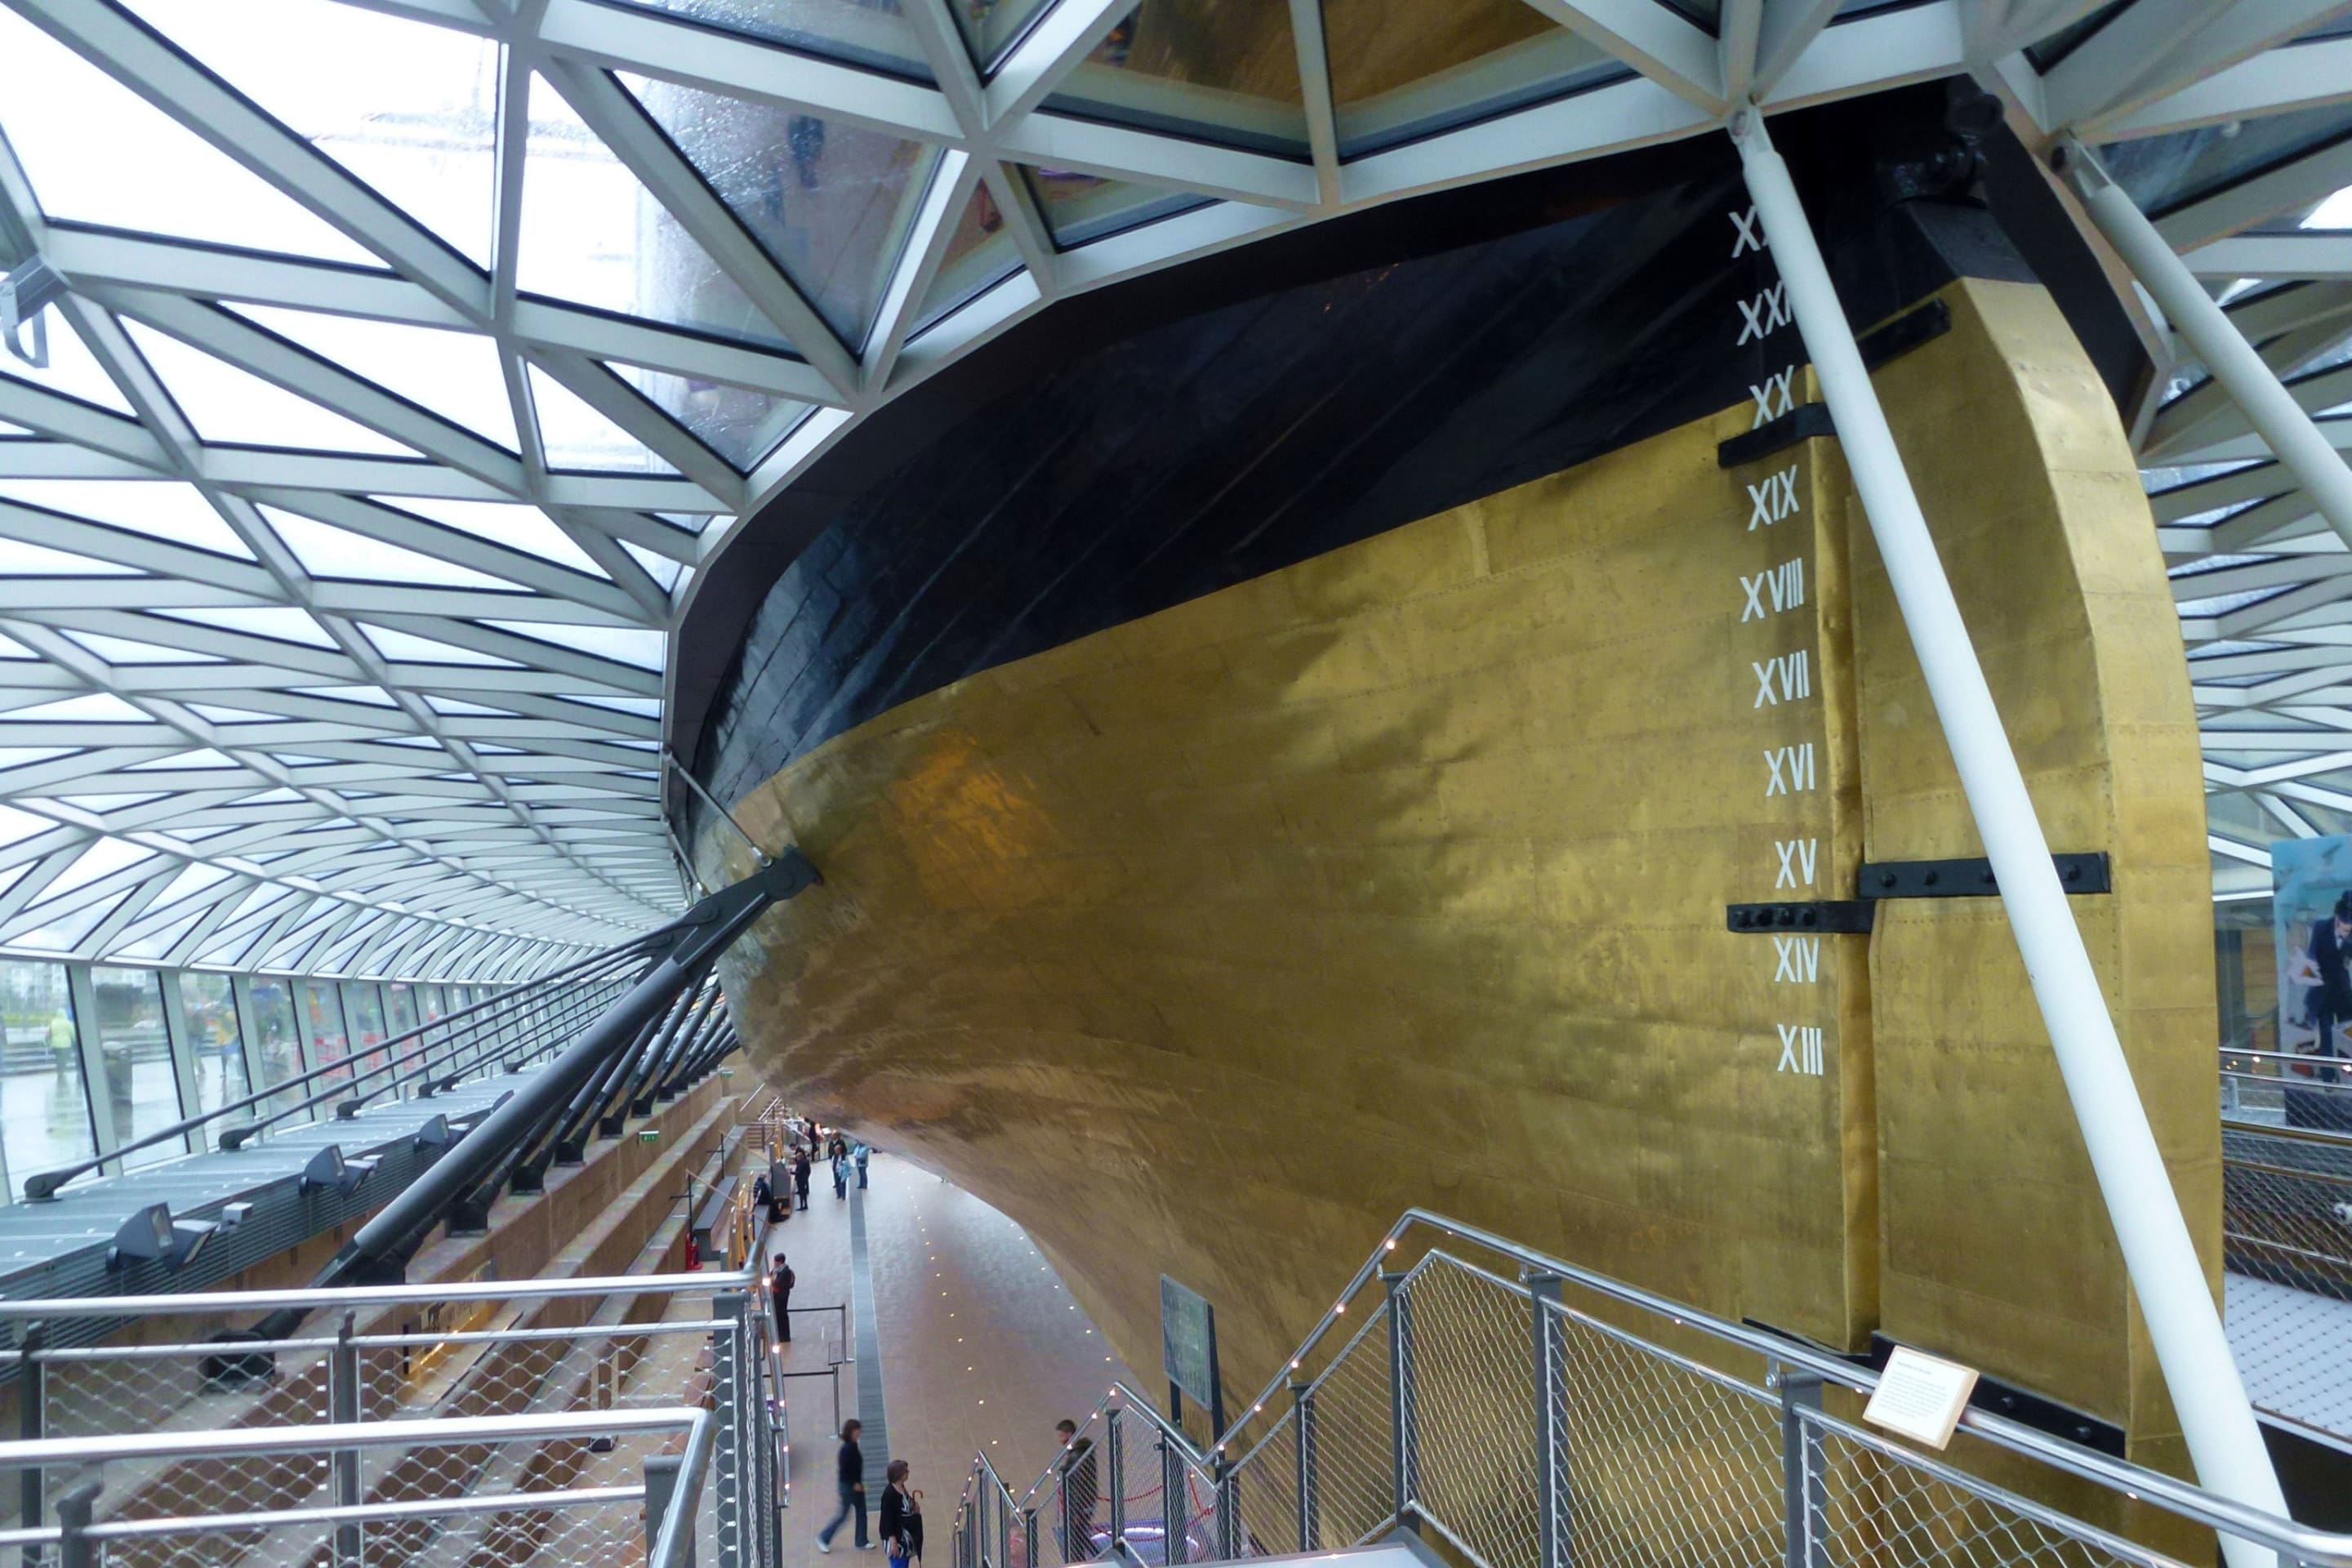 The metal sheathing of Cutty Sark, made from copper alloy.